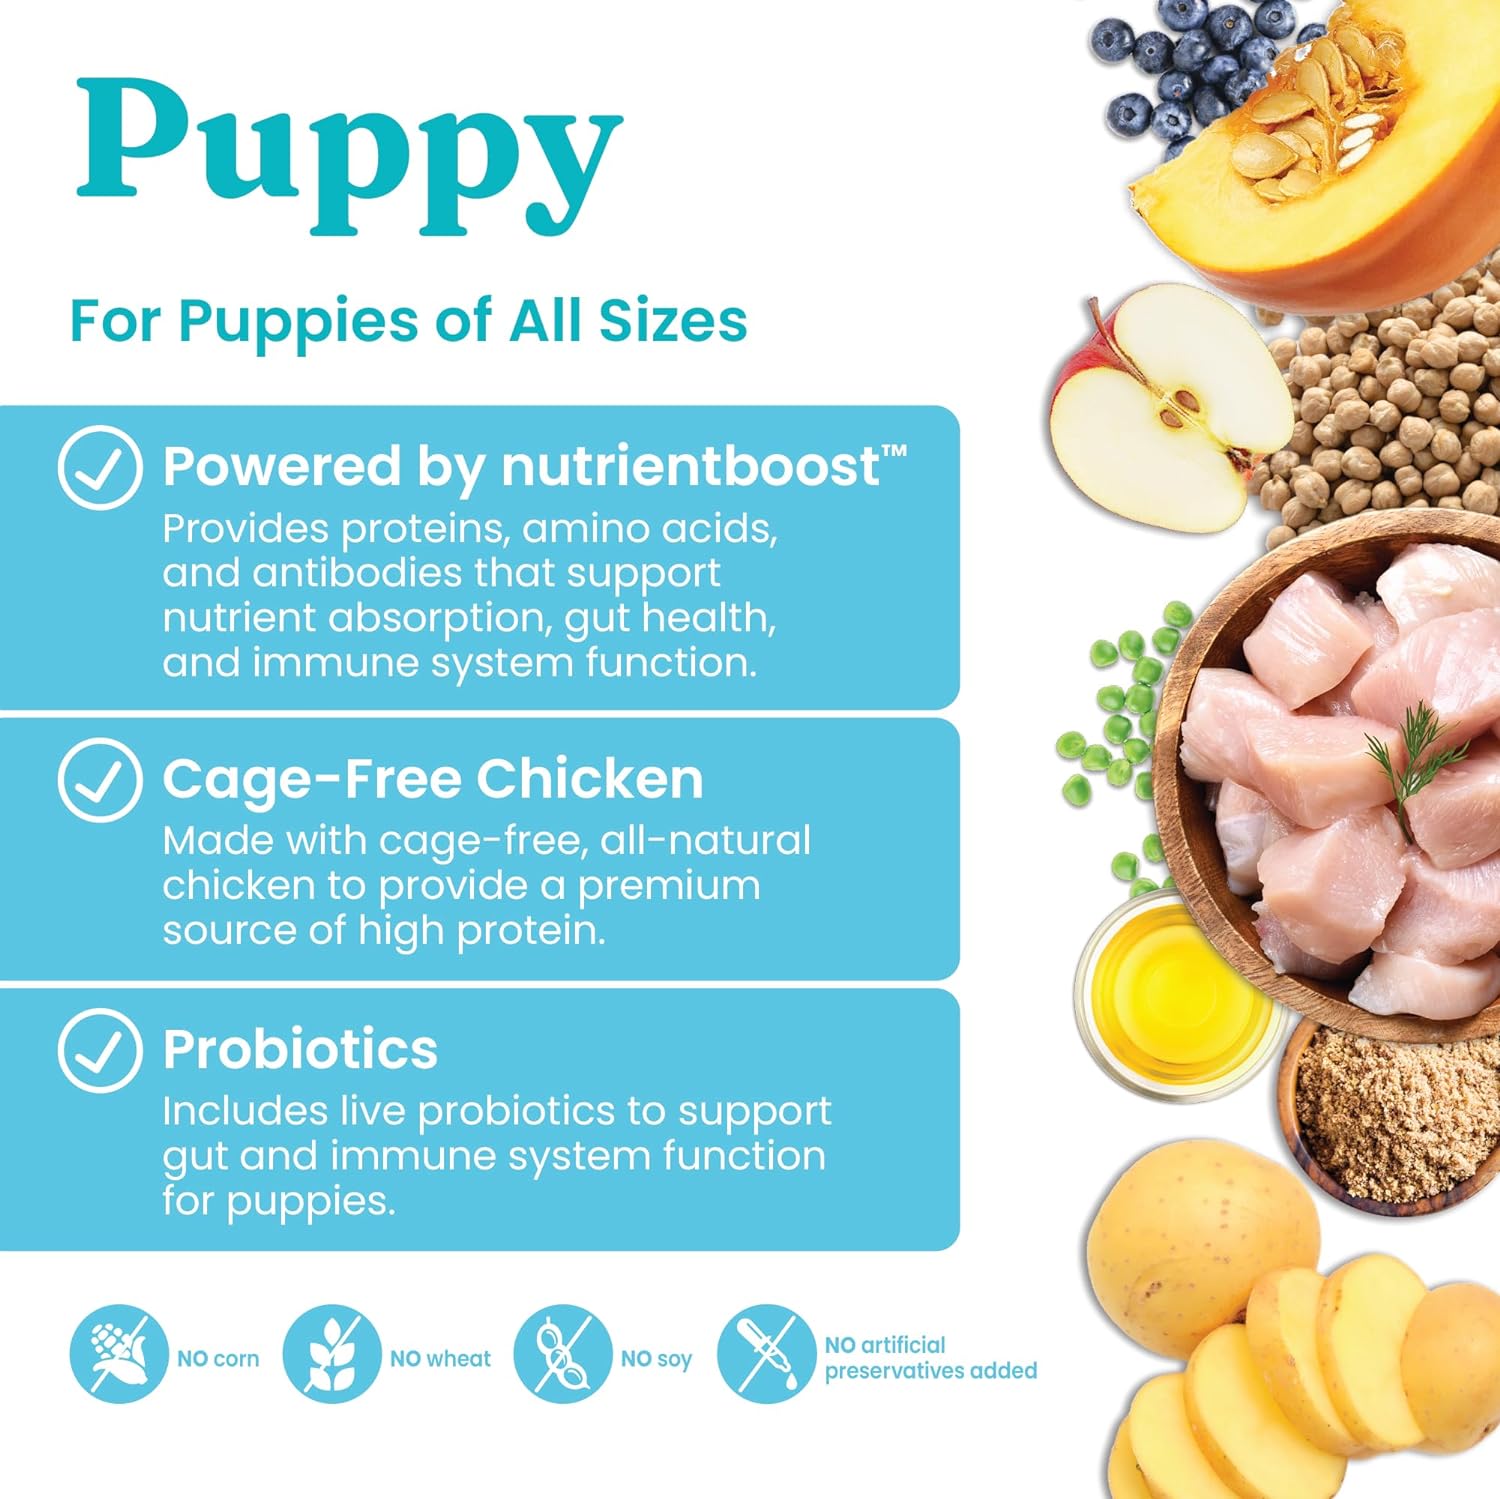 Solid Gold Dry Puppy Food w/Nutrientboost - Made with Real Chicken & Nutritious Superfoods - Love at First Bark Grain Free Puppy Dry Food for Healthy Growth, Energy and Gut Wellness - 3.75 LB Bag : Pet Supplies